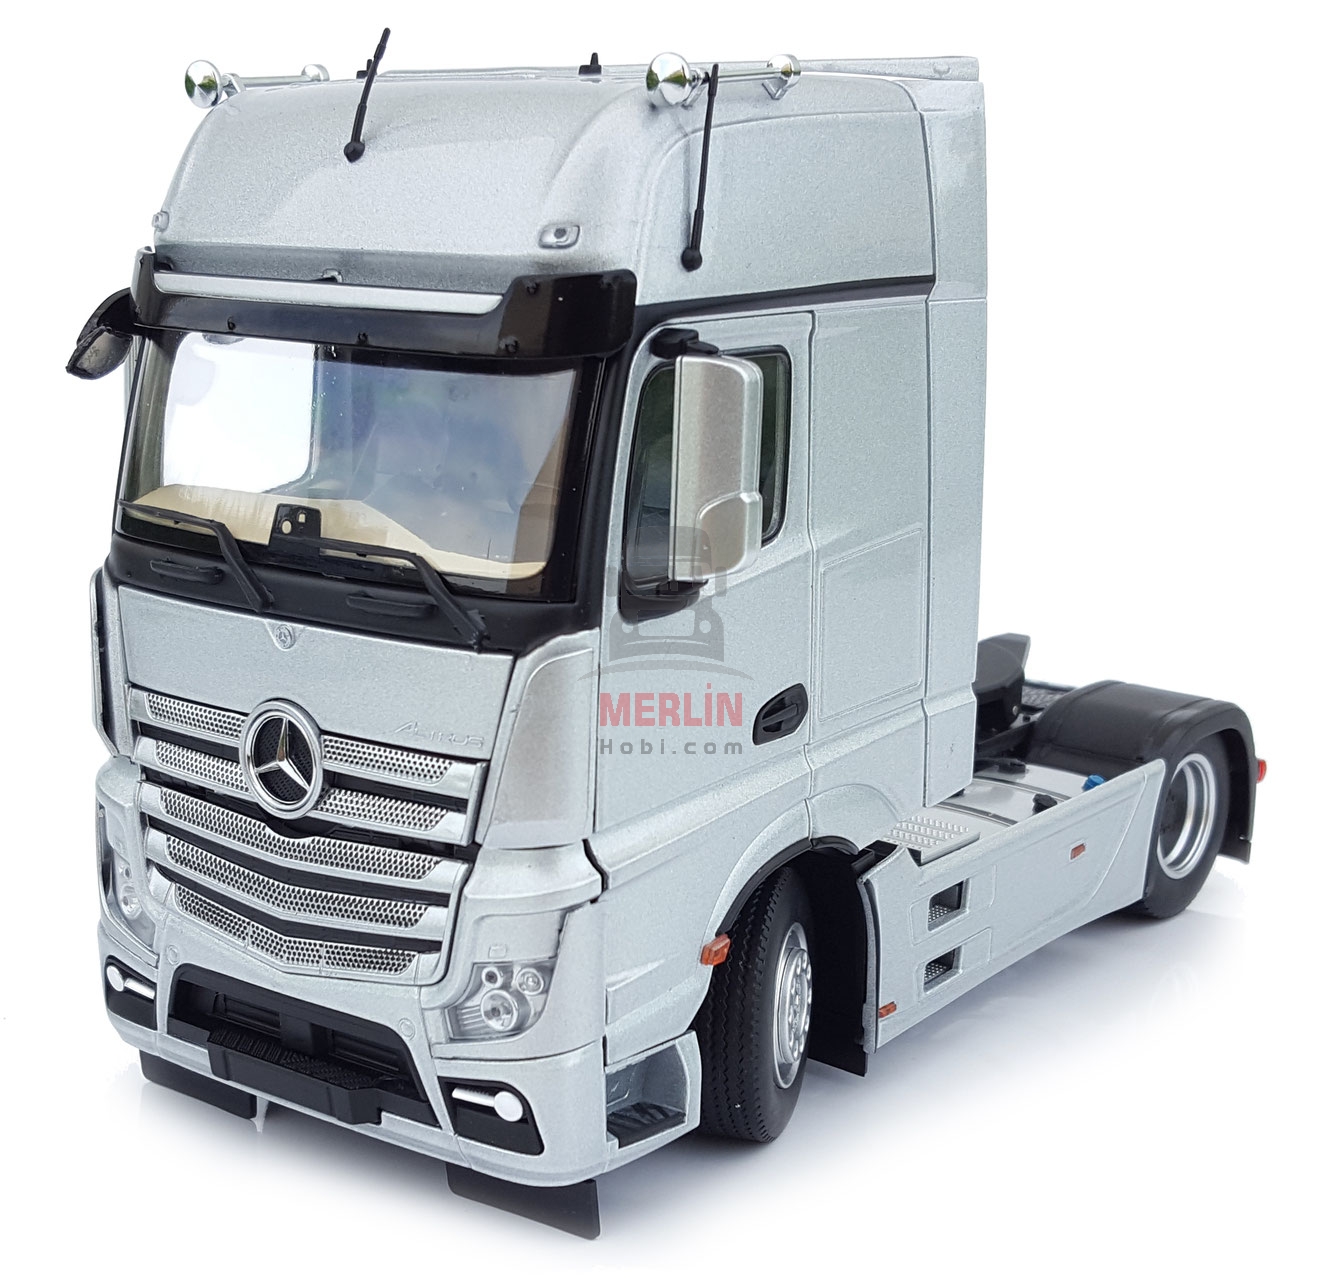 1/32 Marge Mercedes-Benz Actros Gigaspace 4x2 - Gri Renk